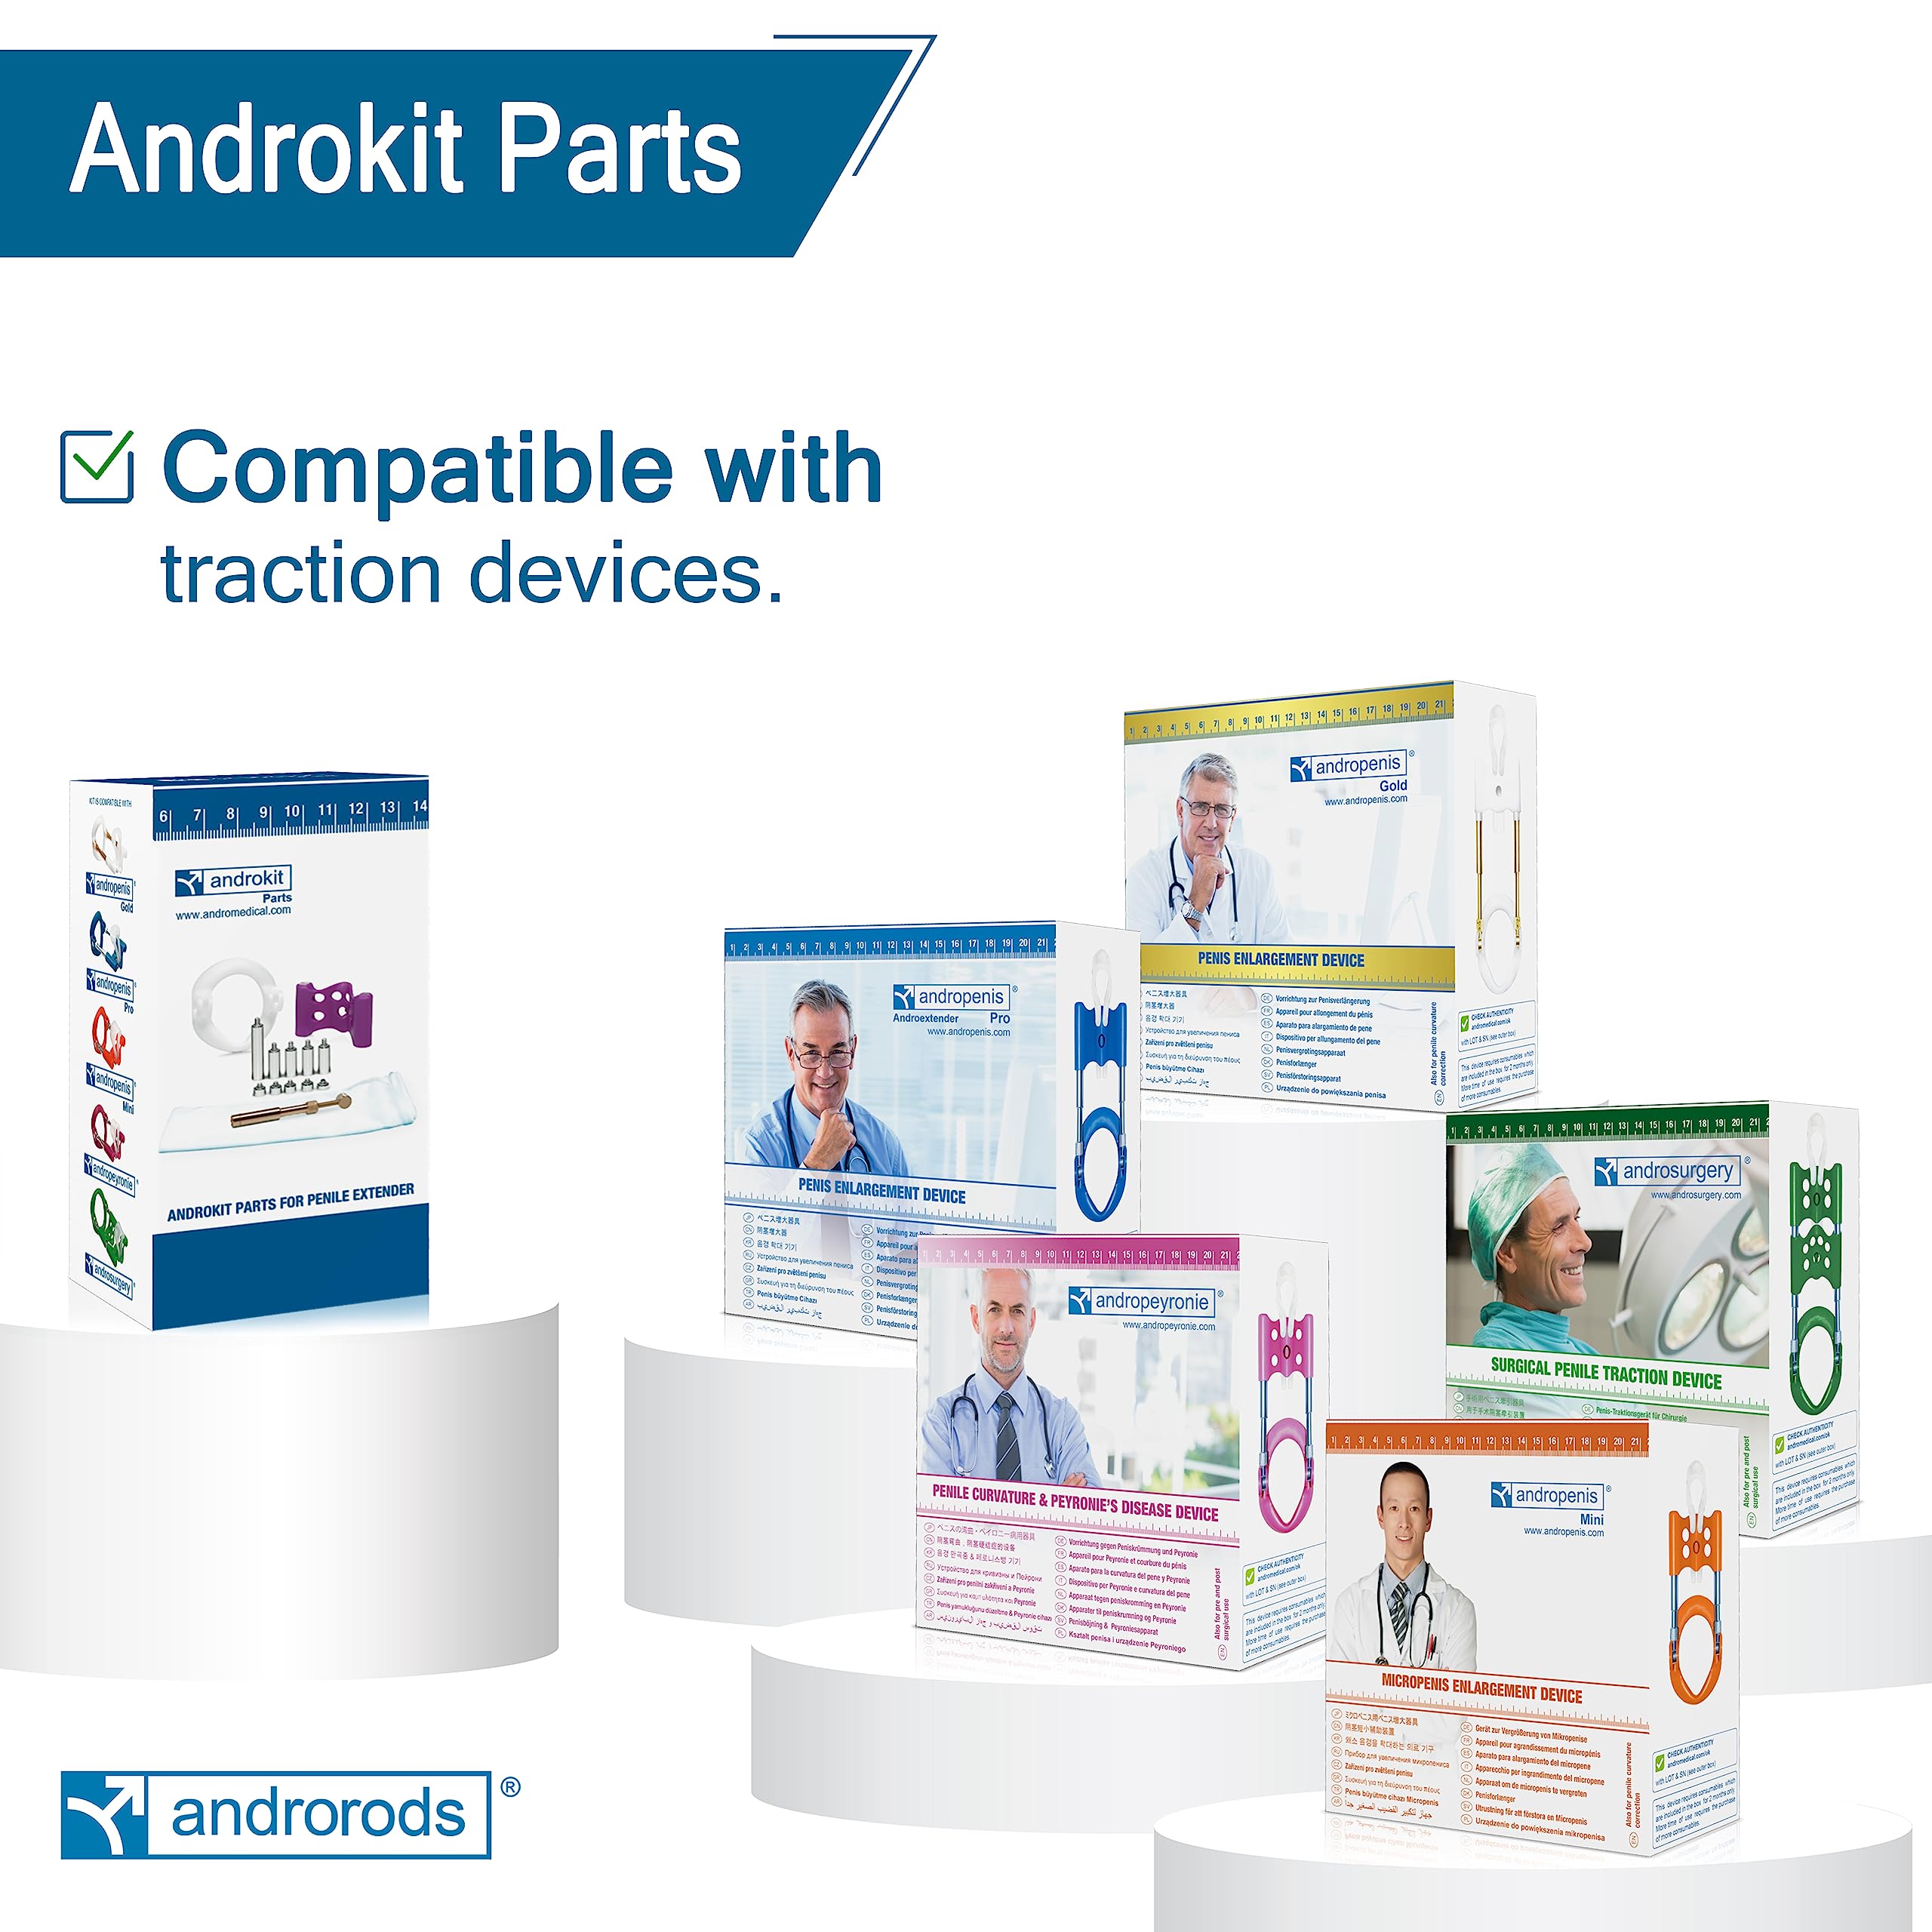 Androkit Parts | Andromedical Brand | Accessories & Spare Parts for Andropenis - Androsurgery - Andropeyronie